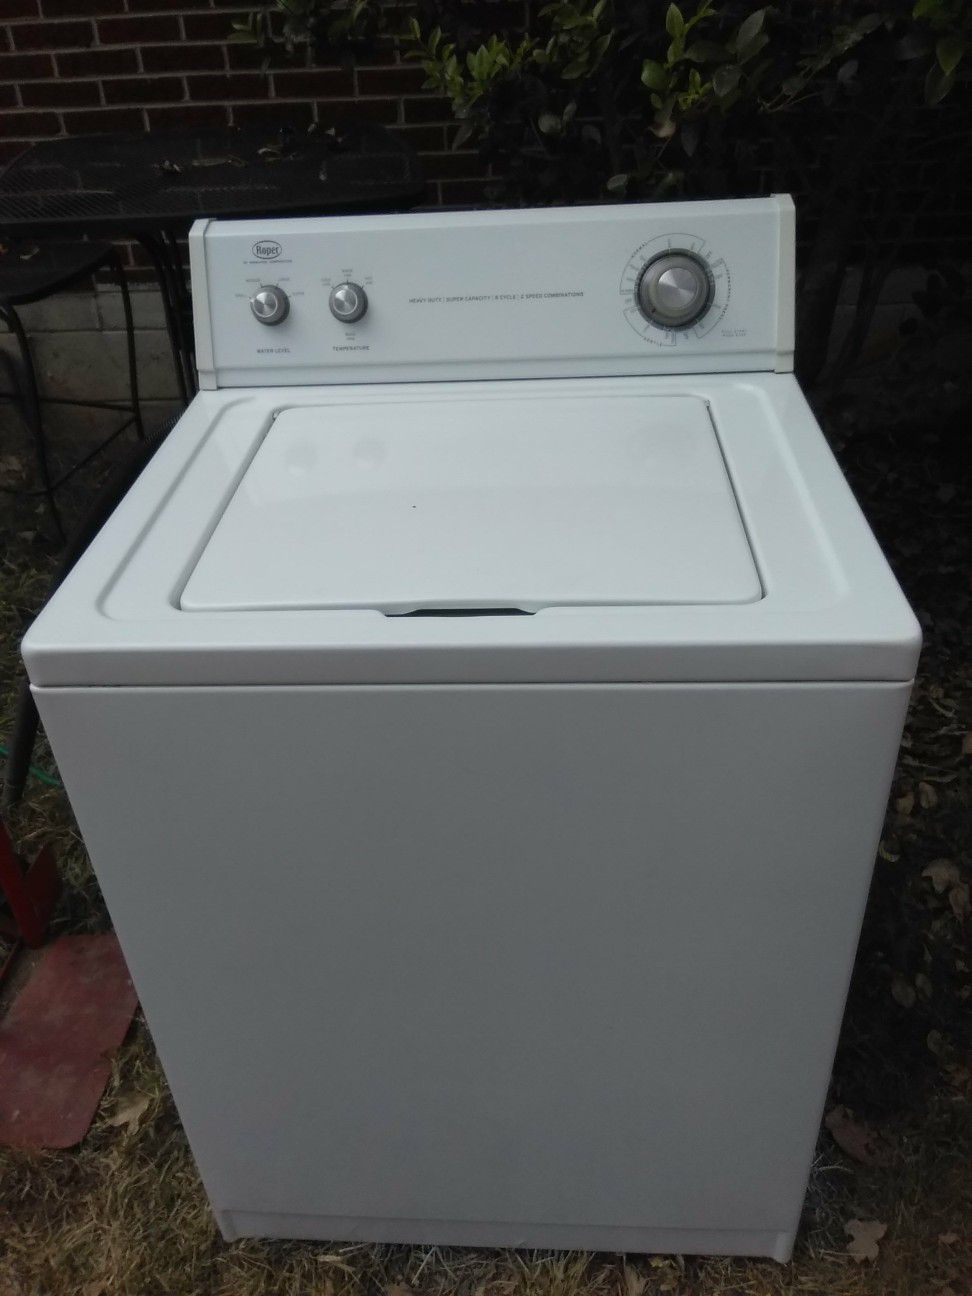 Roper washing machine great condition works excellent no issues $95